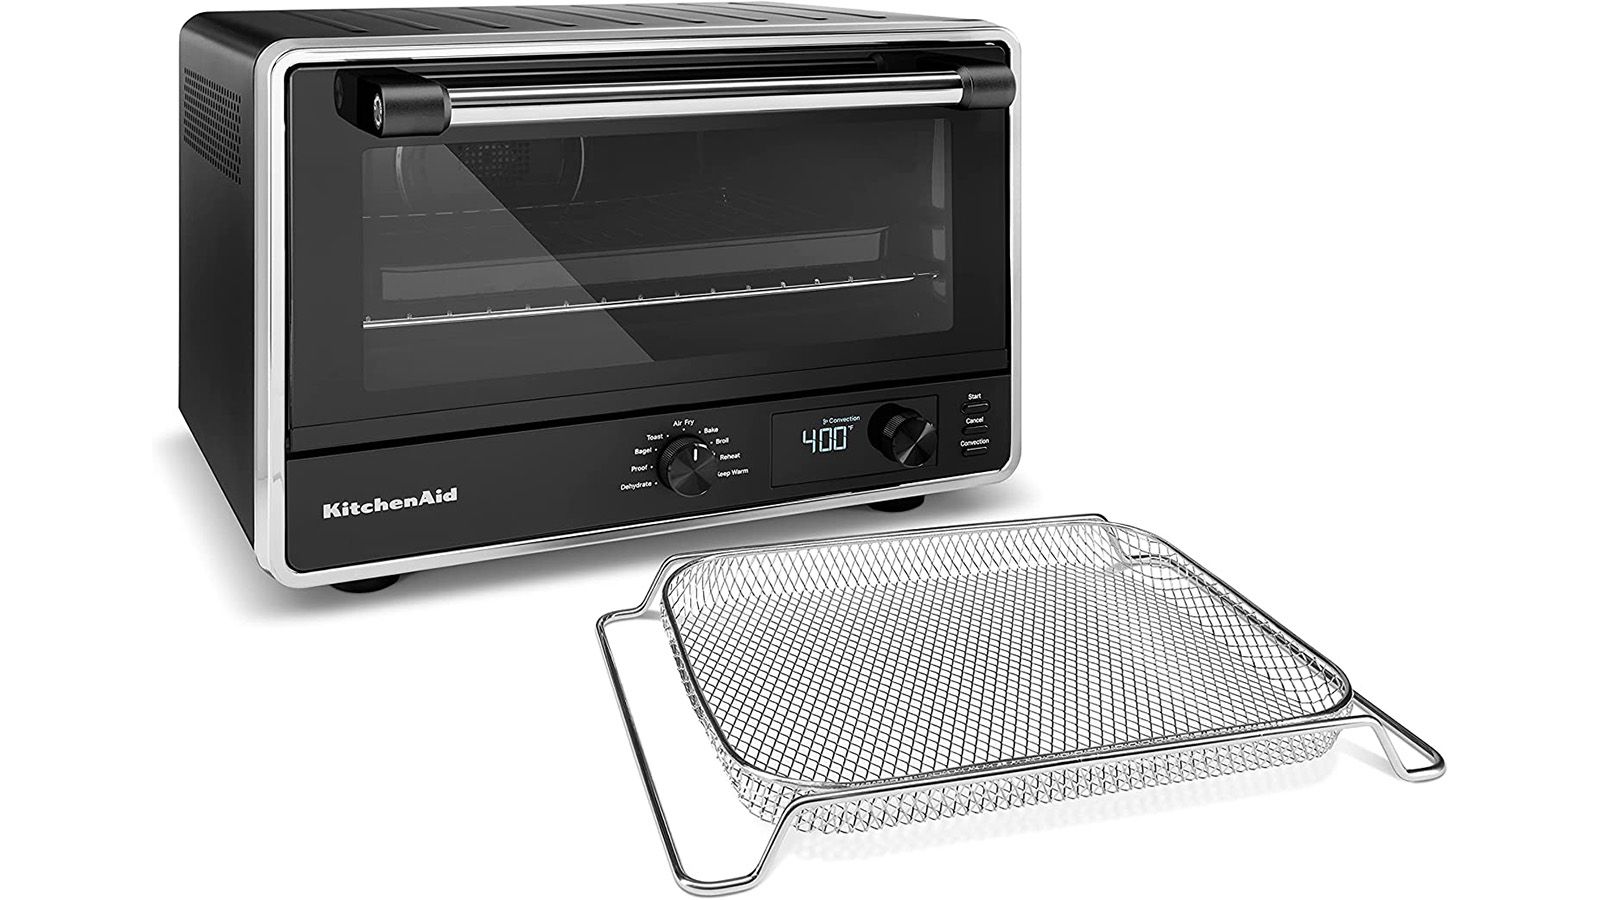 Toaster Oven vs. Countertop Oven: What's the Difference?